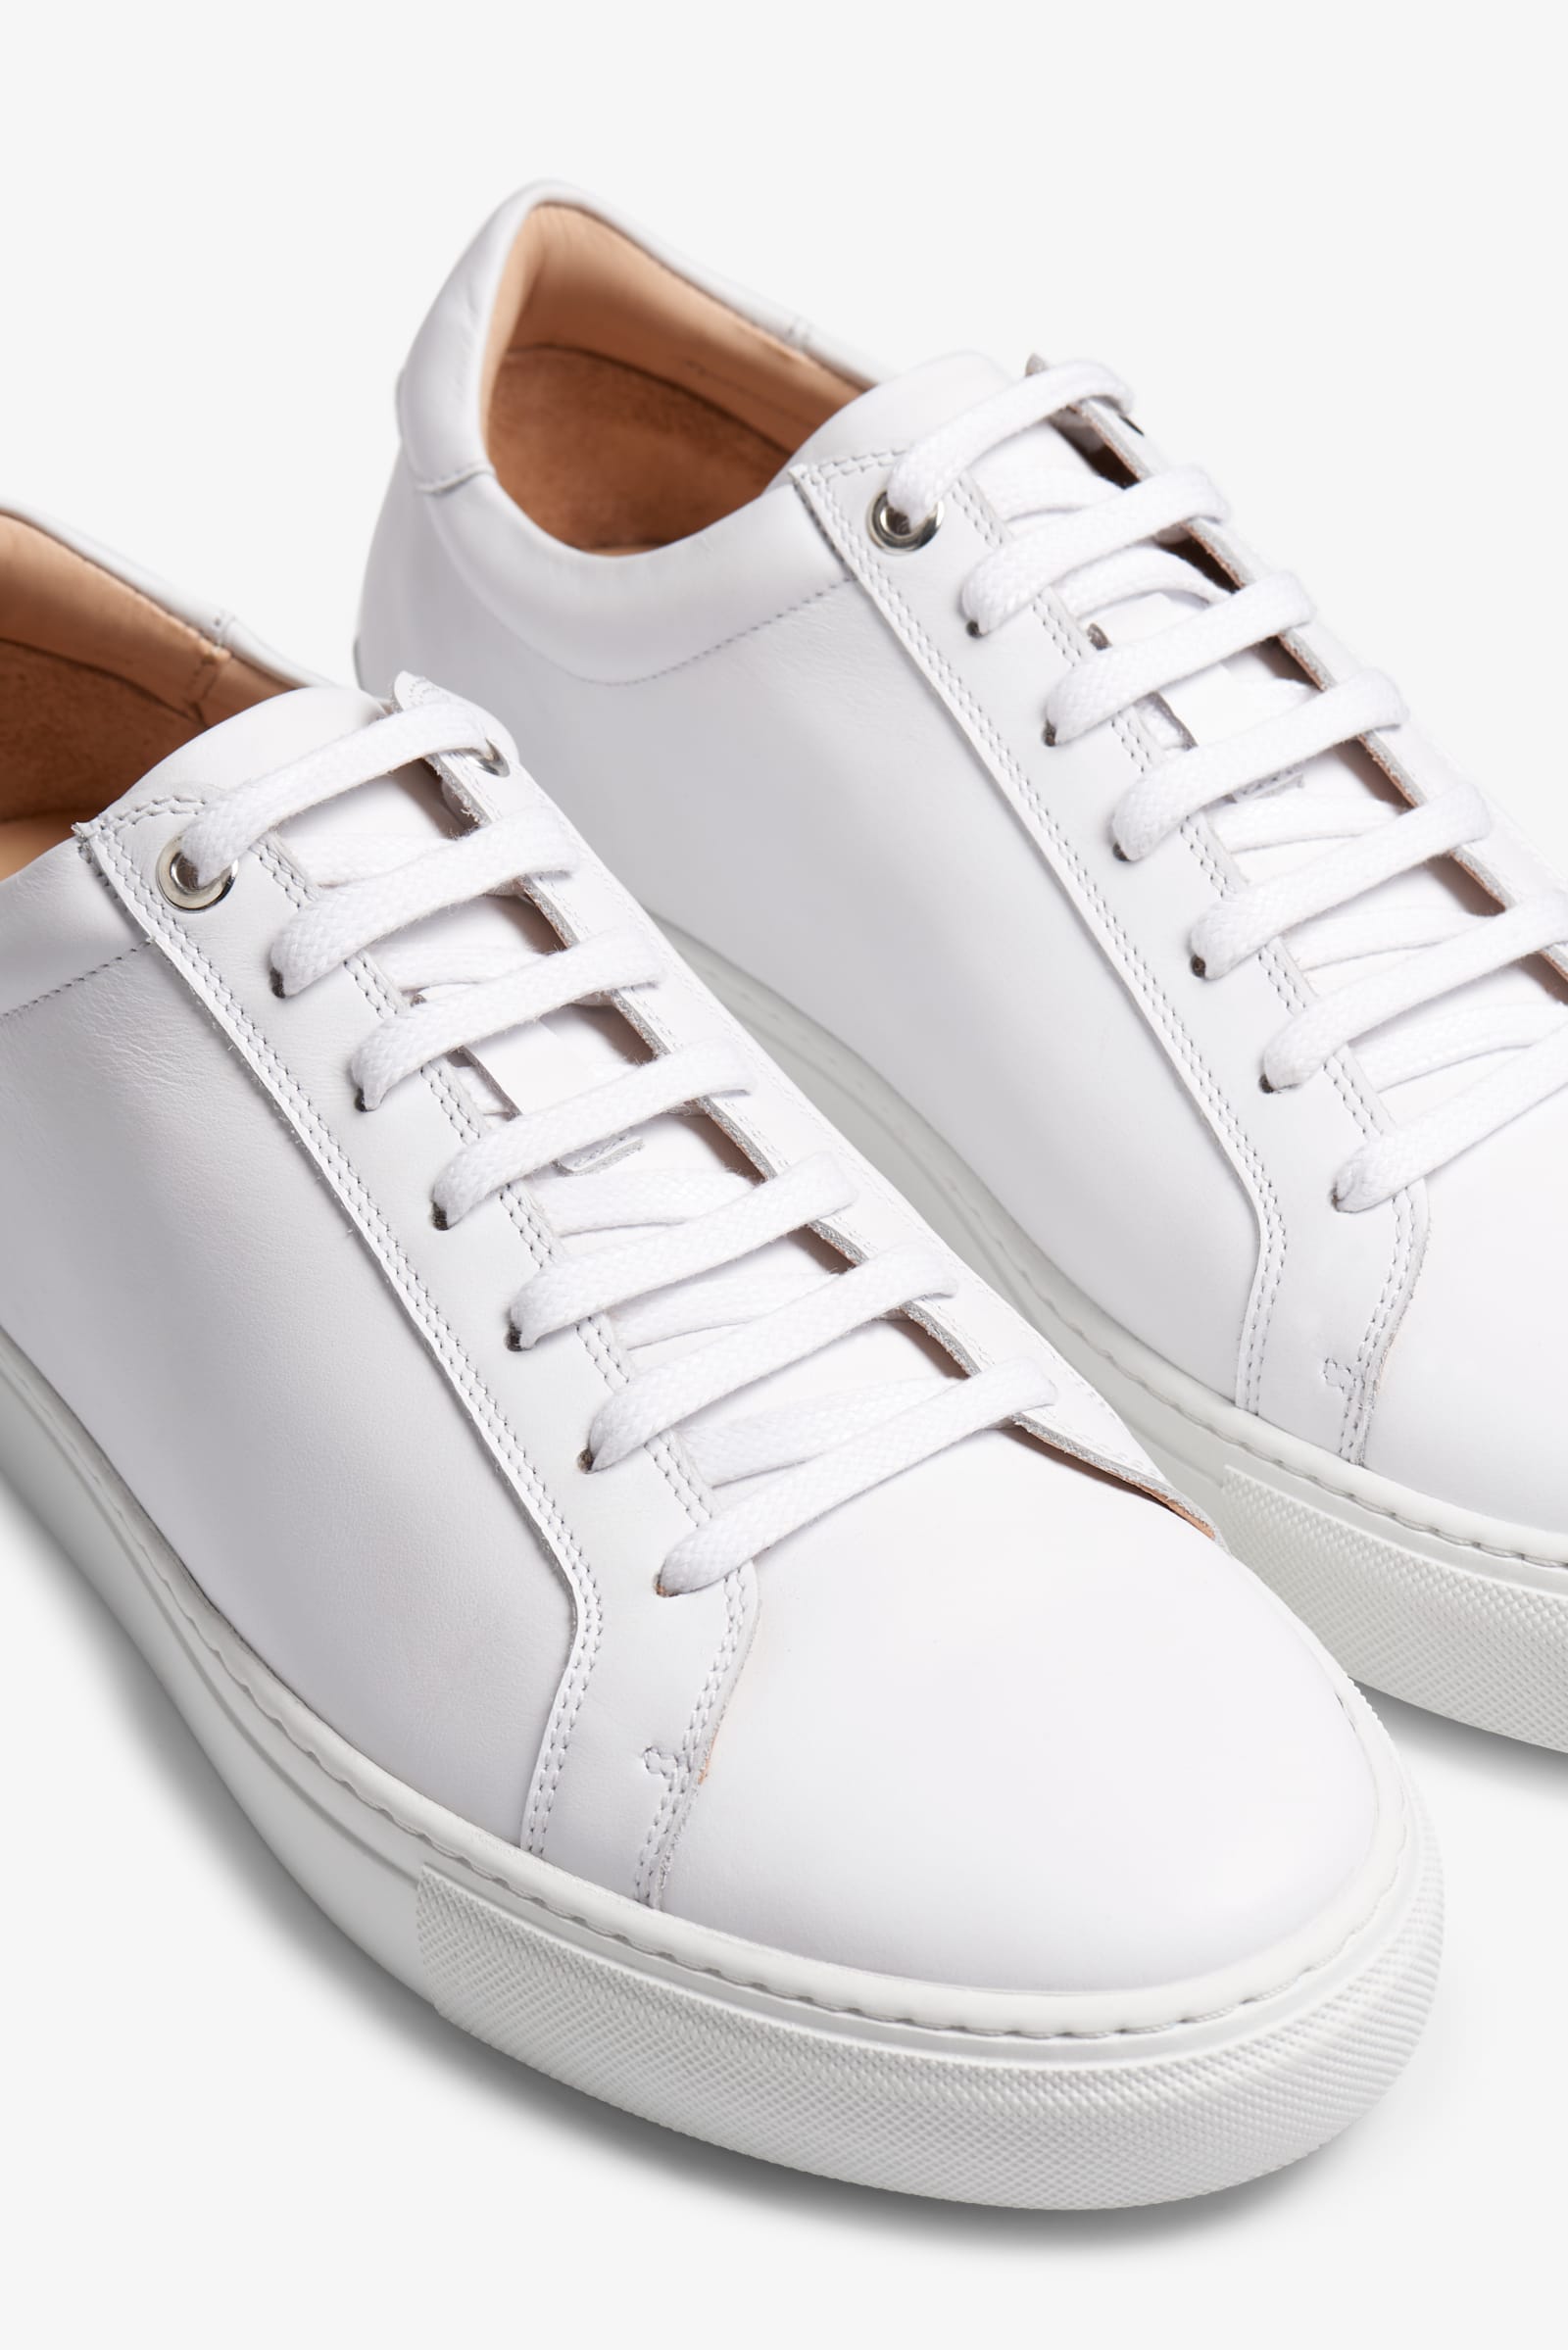 The Best White Leather lace-up Trainers - VanityForbes